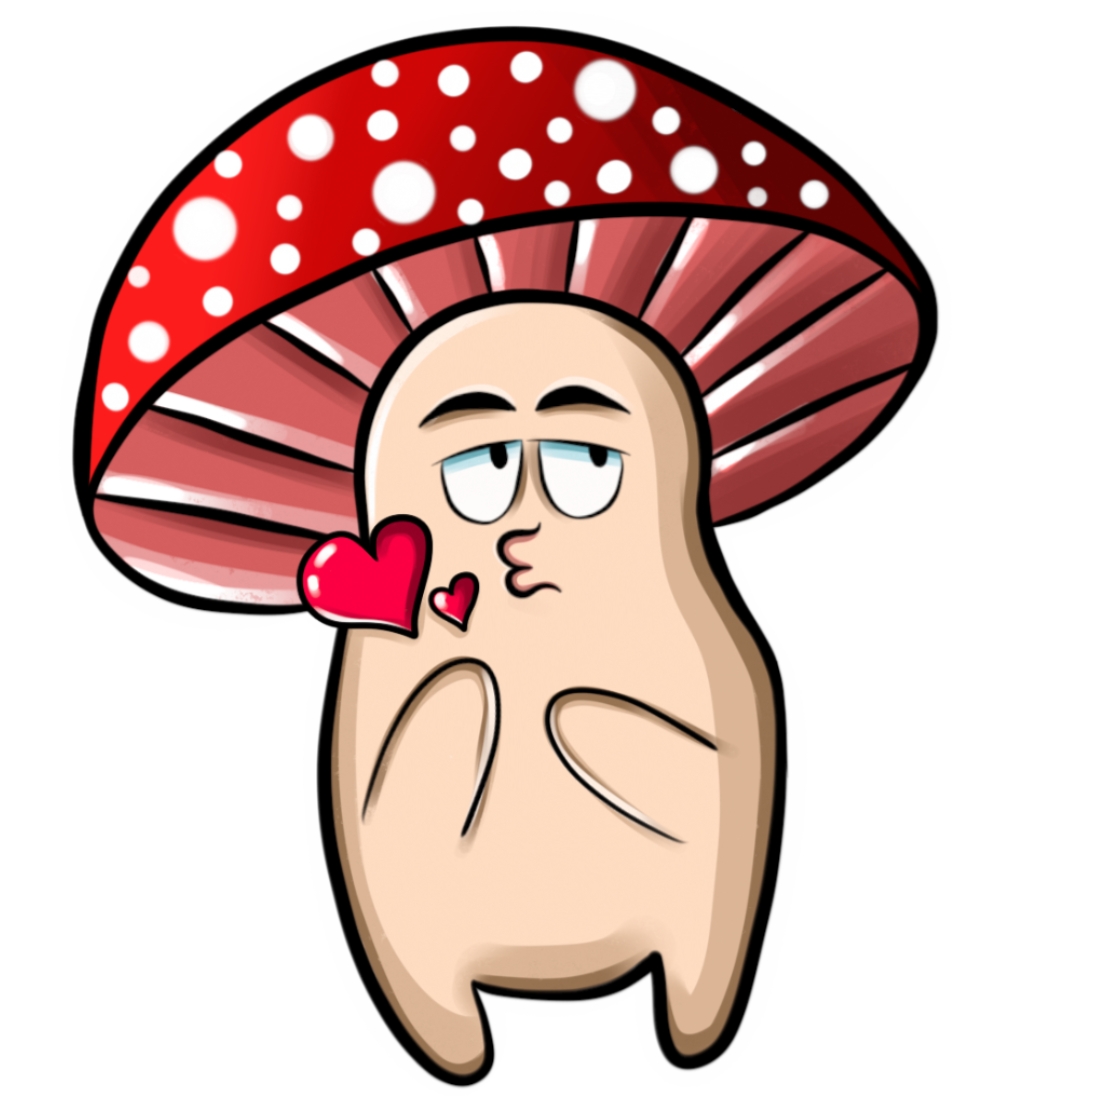 Stikers on Mushrooms previews.